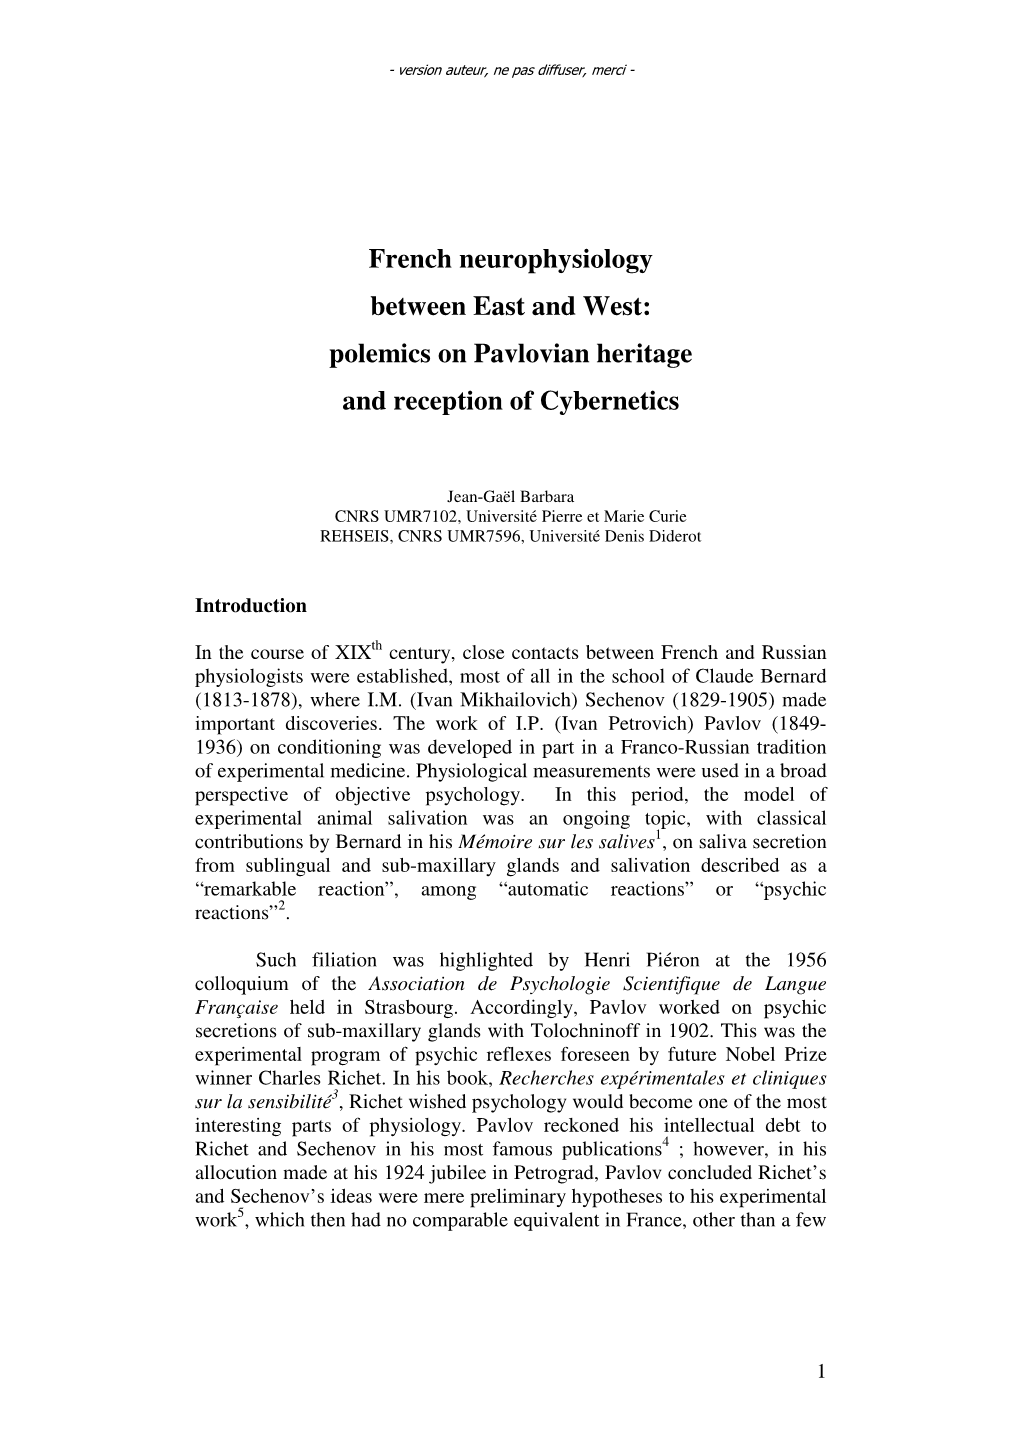 French Neurophysiology Between East and West: Polemics on Pavlovian Heritage and Reception of Cybernetics